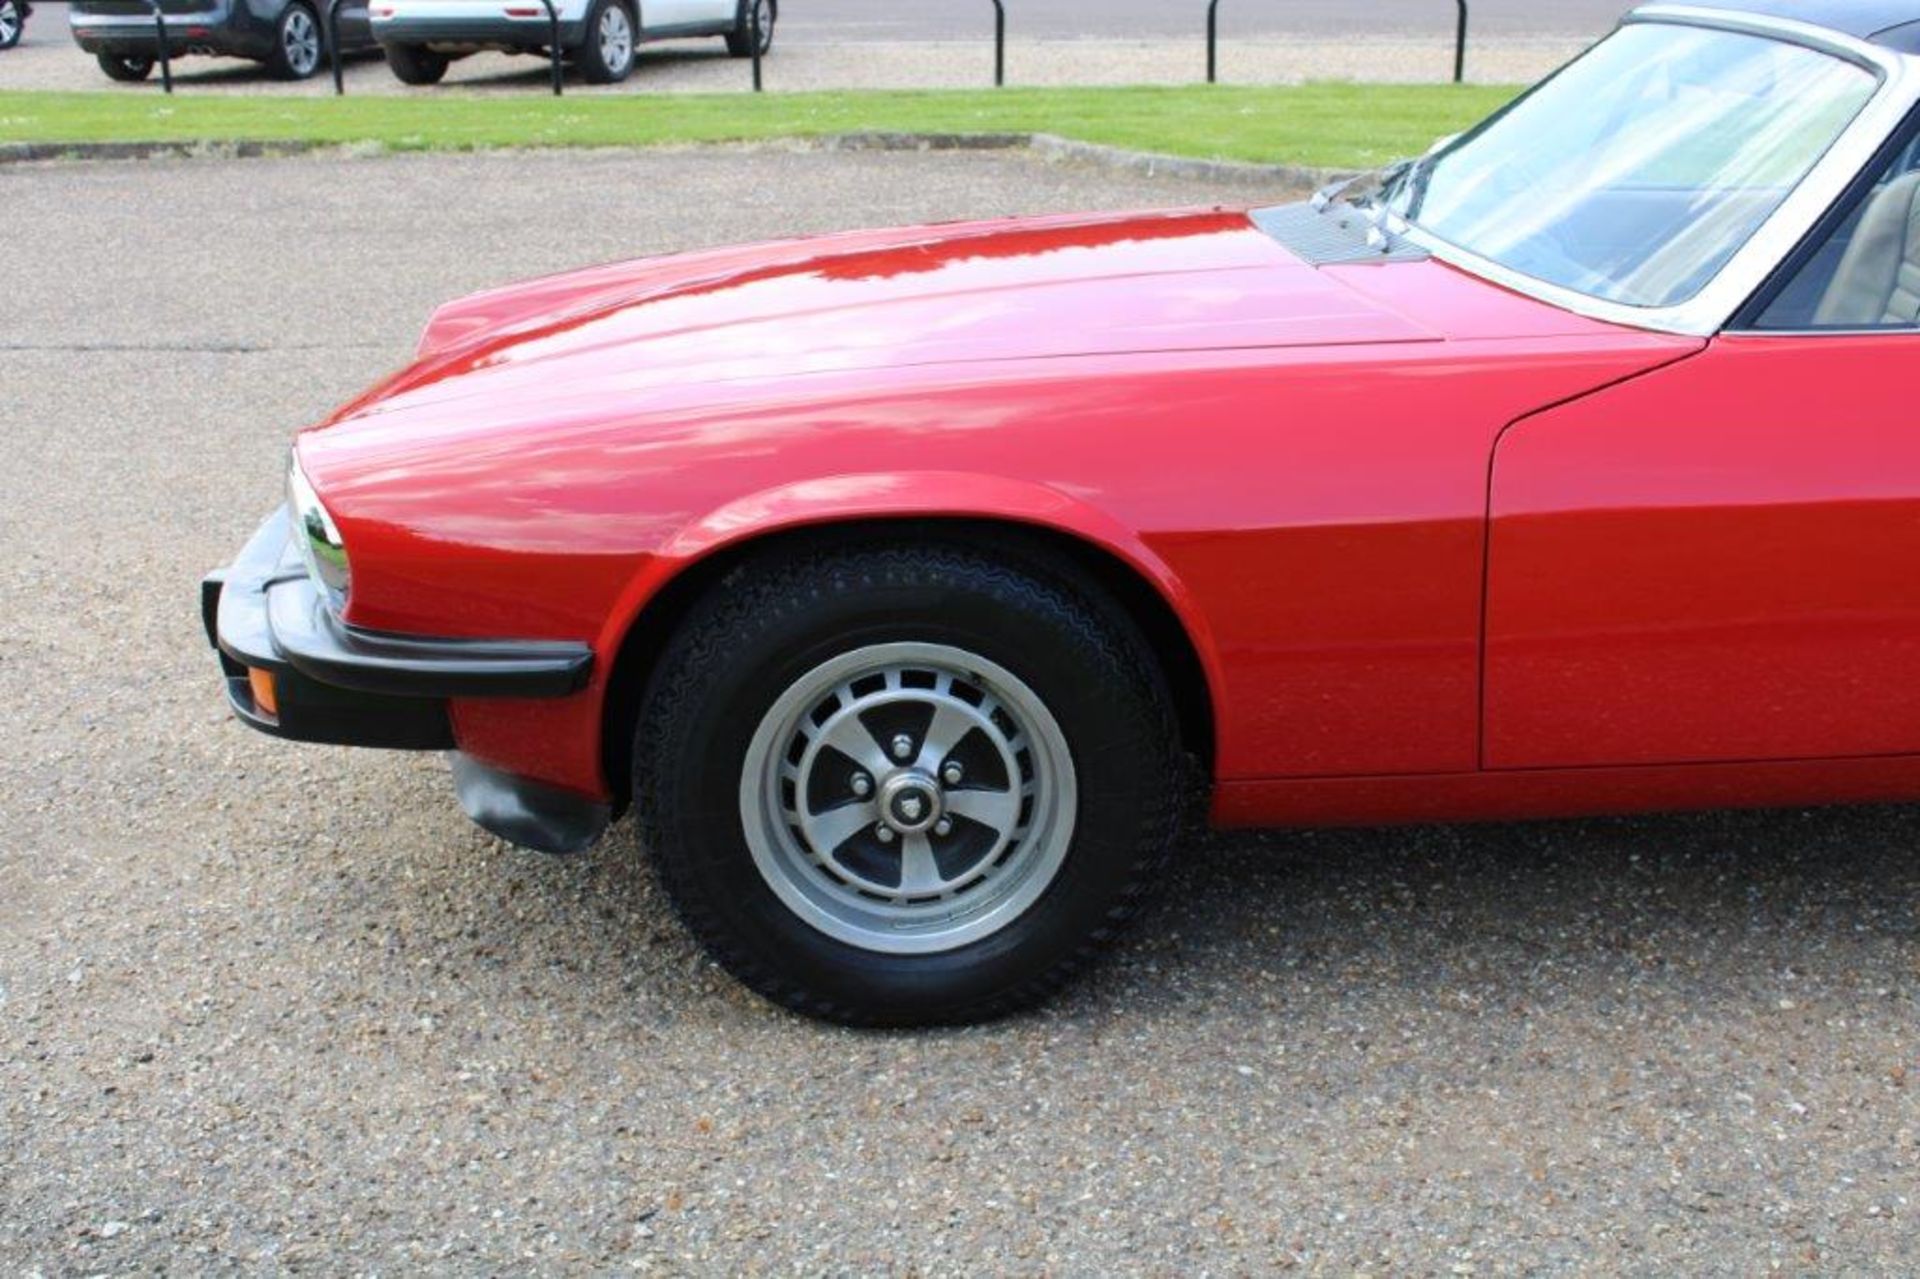 1976 Jaguar XJ-S 5.3 V12 Coupe Auto 29,030 miles from new - Image 10 of 28